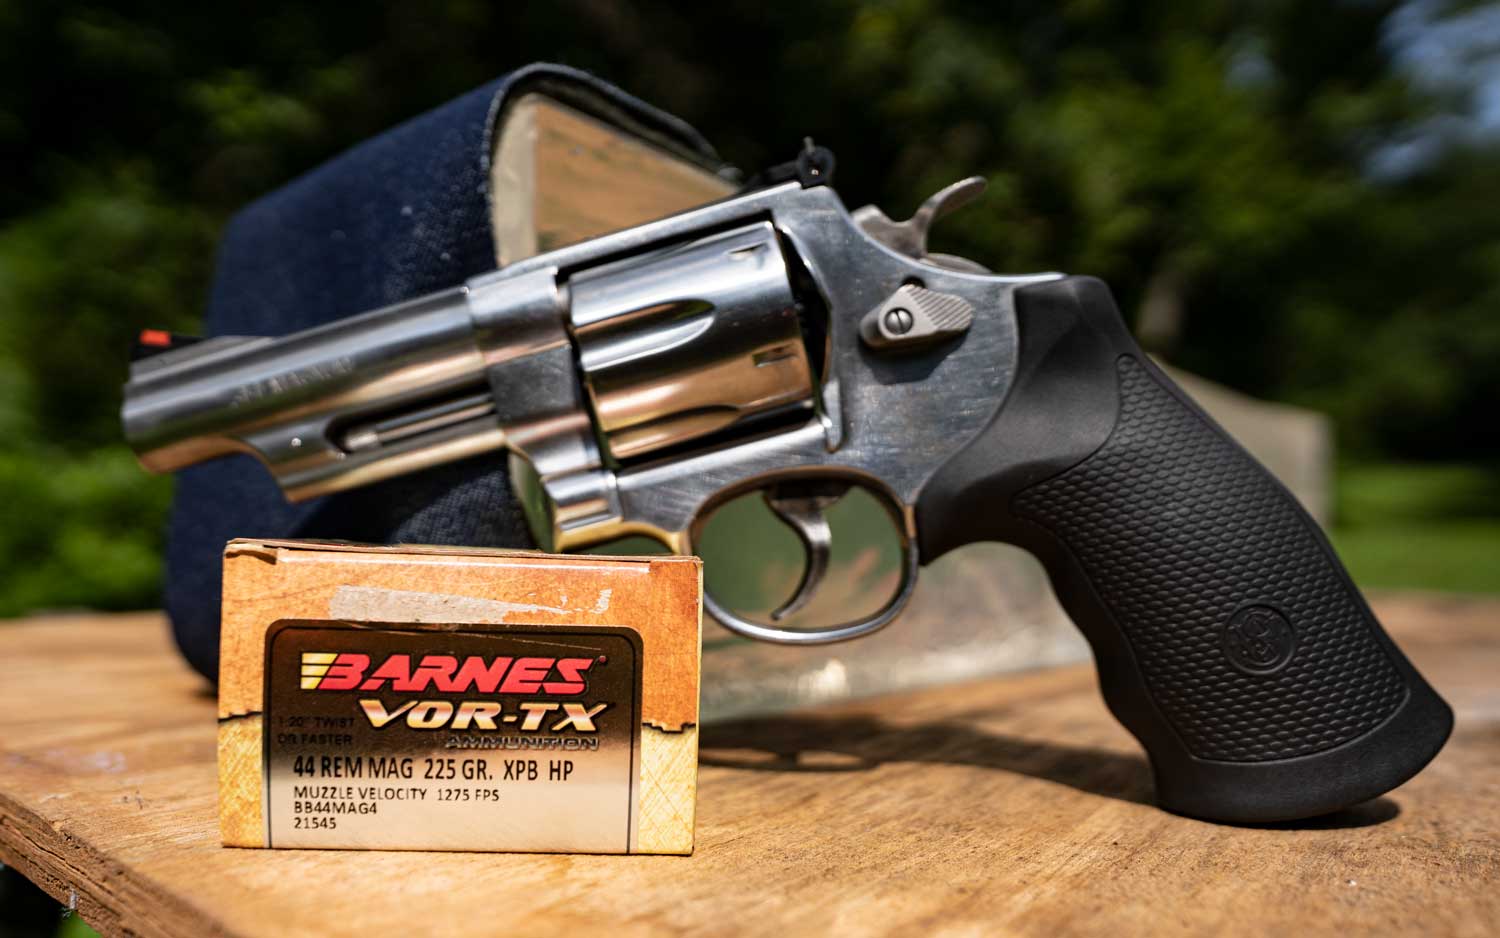 A 44 magnum revolver by Smith & Wesson with Barnes ammunition